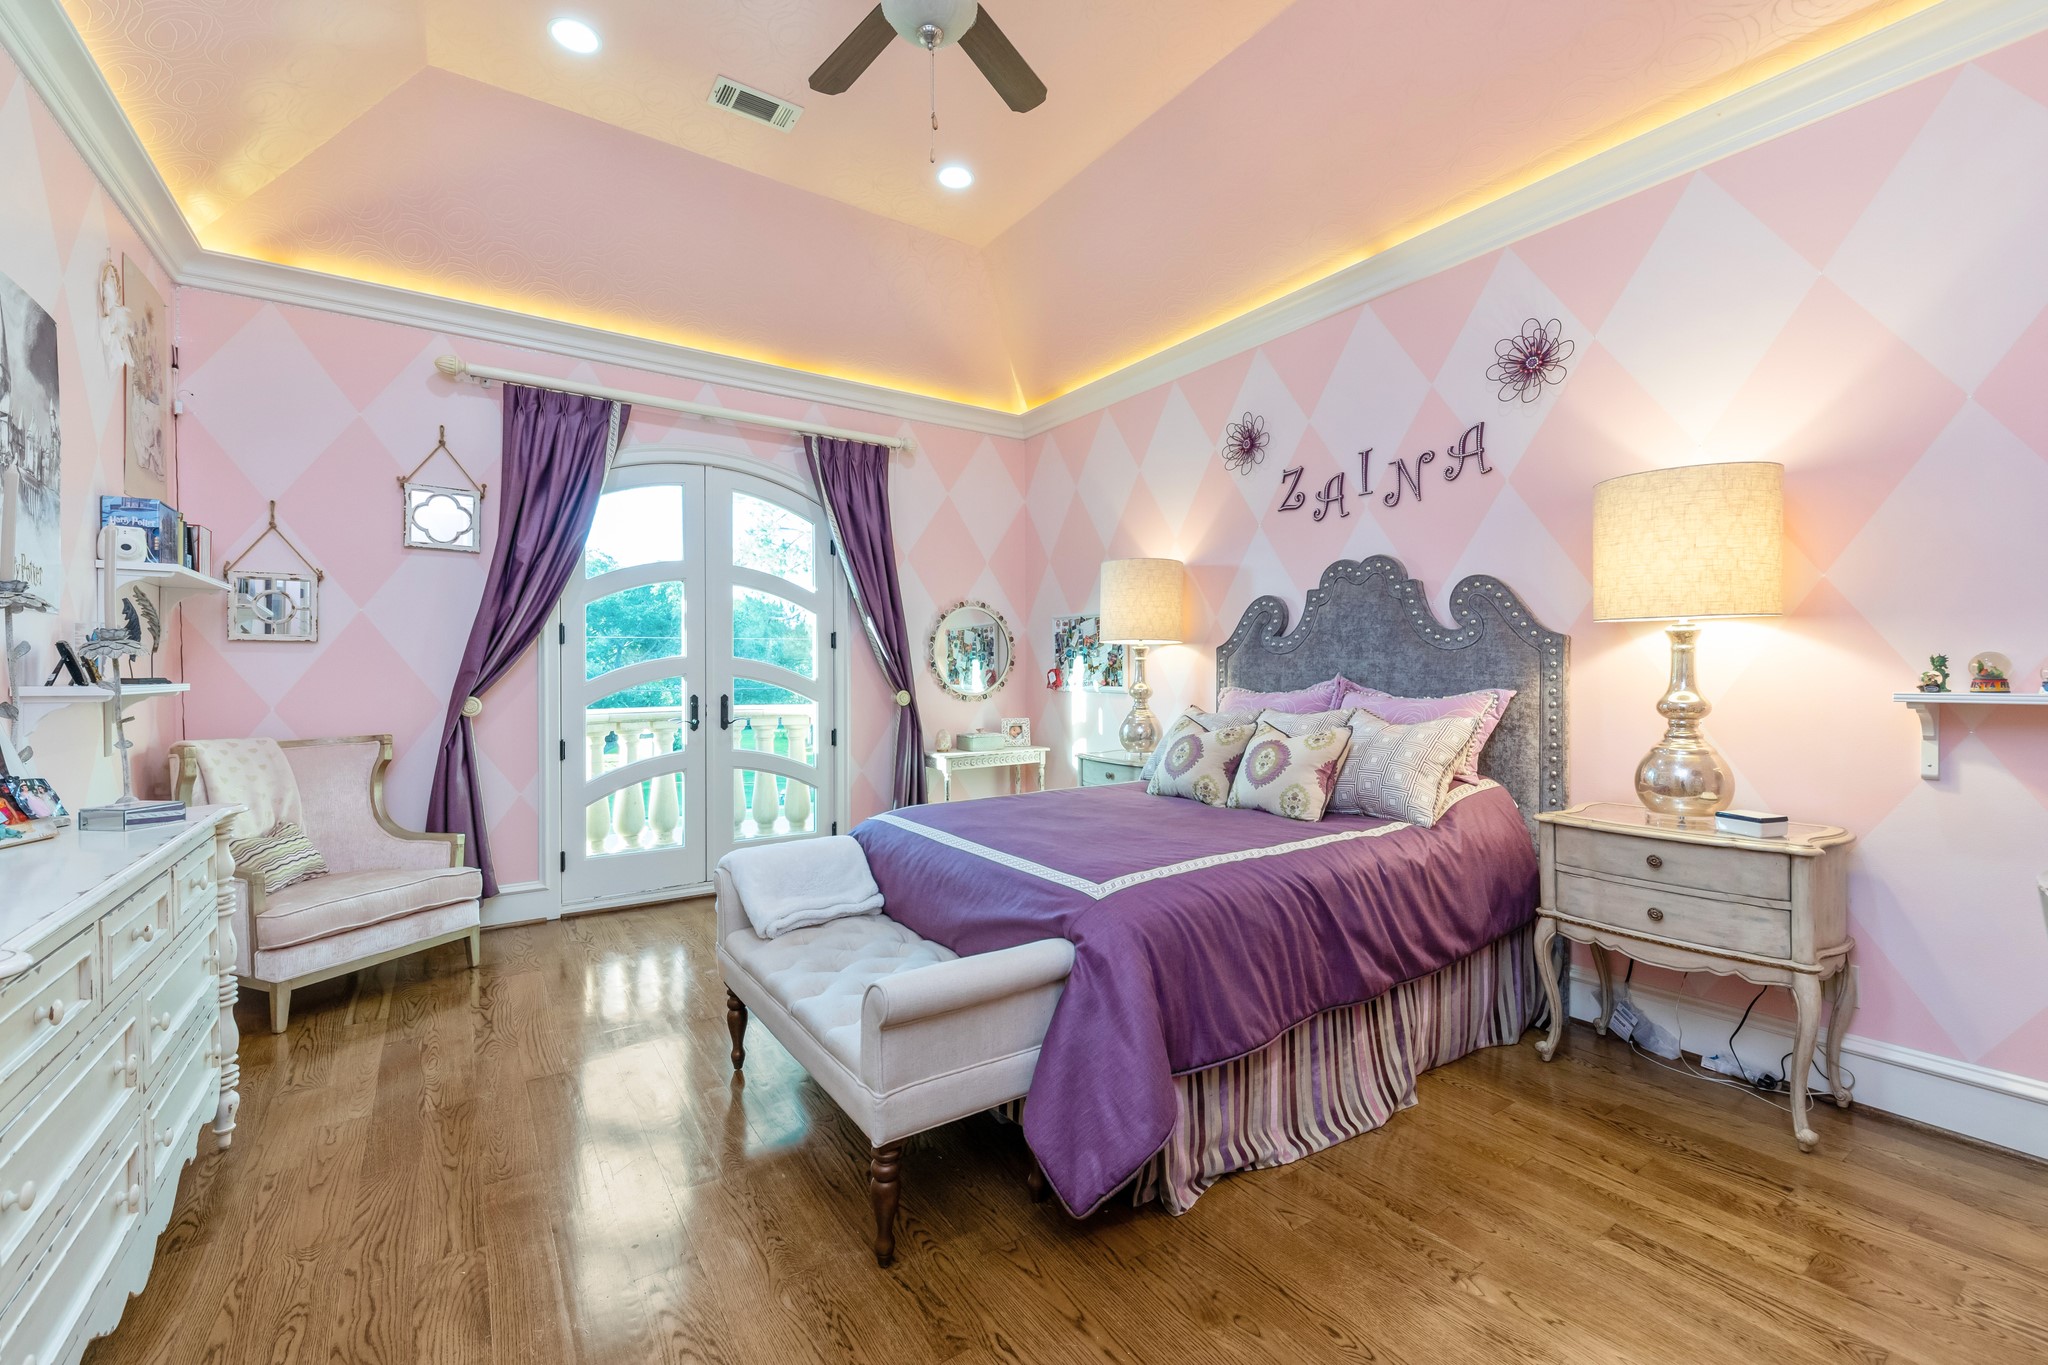 This room is fit for a princess! French entry doors leading into the bathroom. Located near the barrel vaulted art gallery/hallway with trayed ceilings with recessed lighting, custom paint design, generous walk-in closet with custom built-ins.